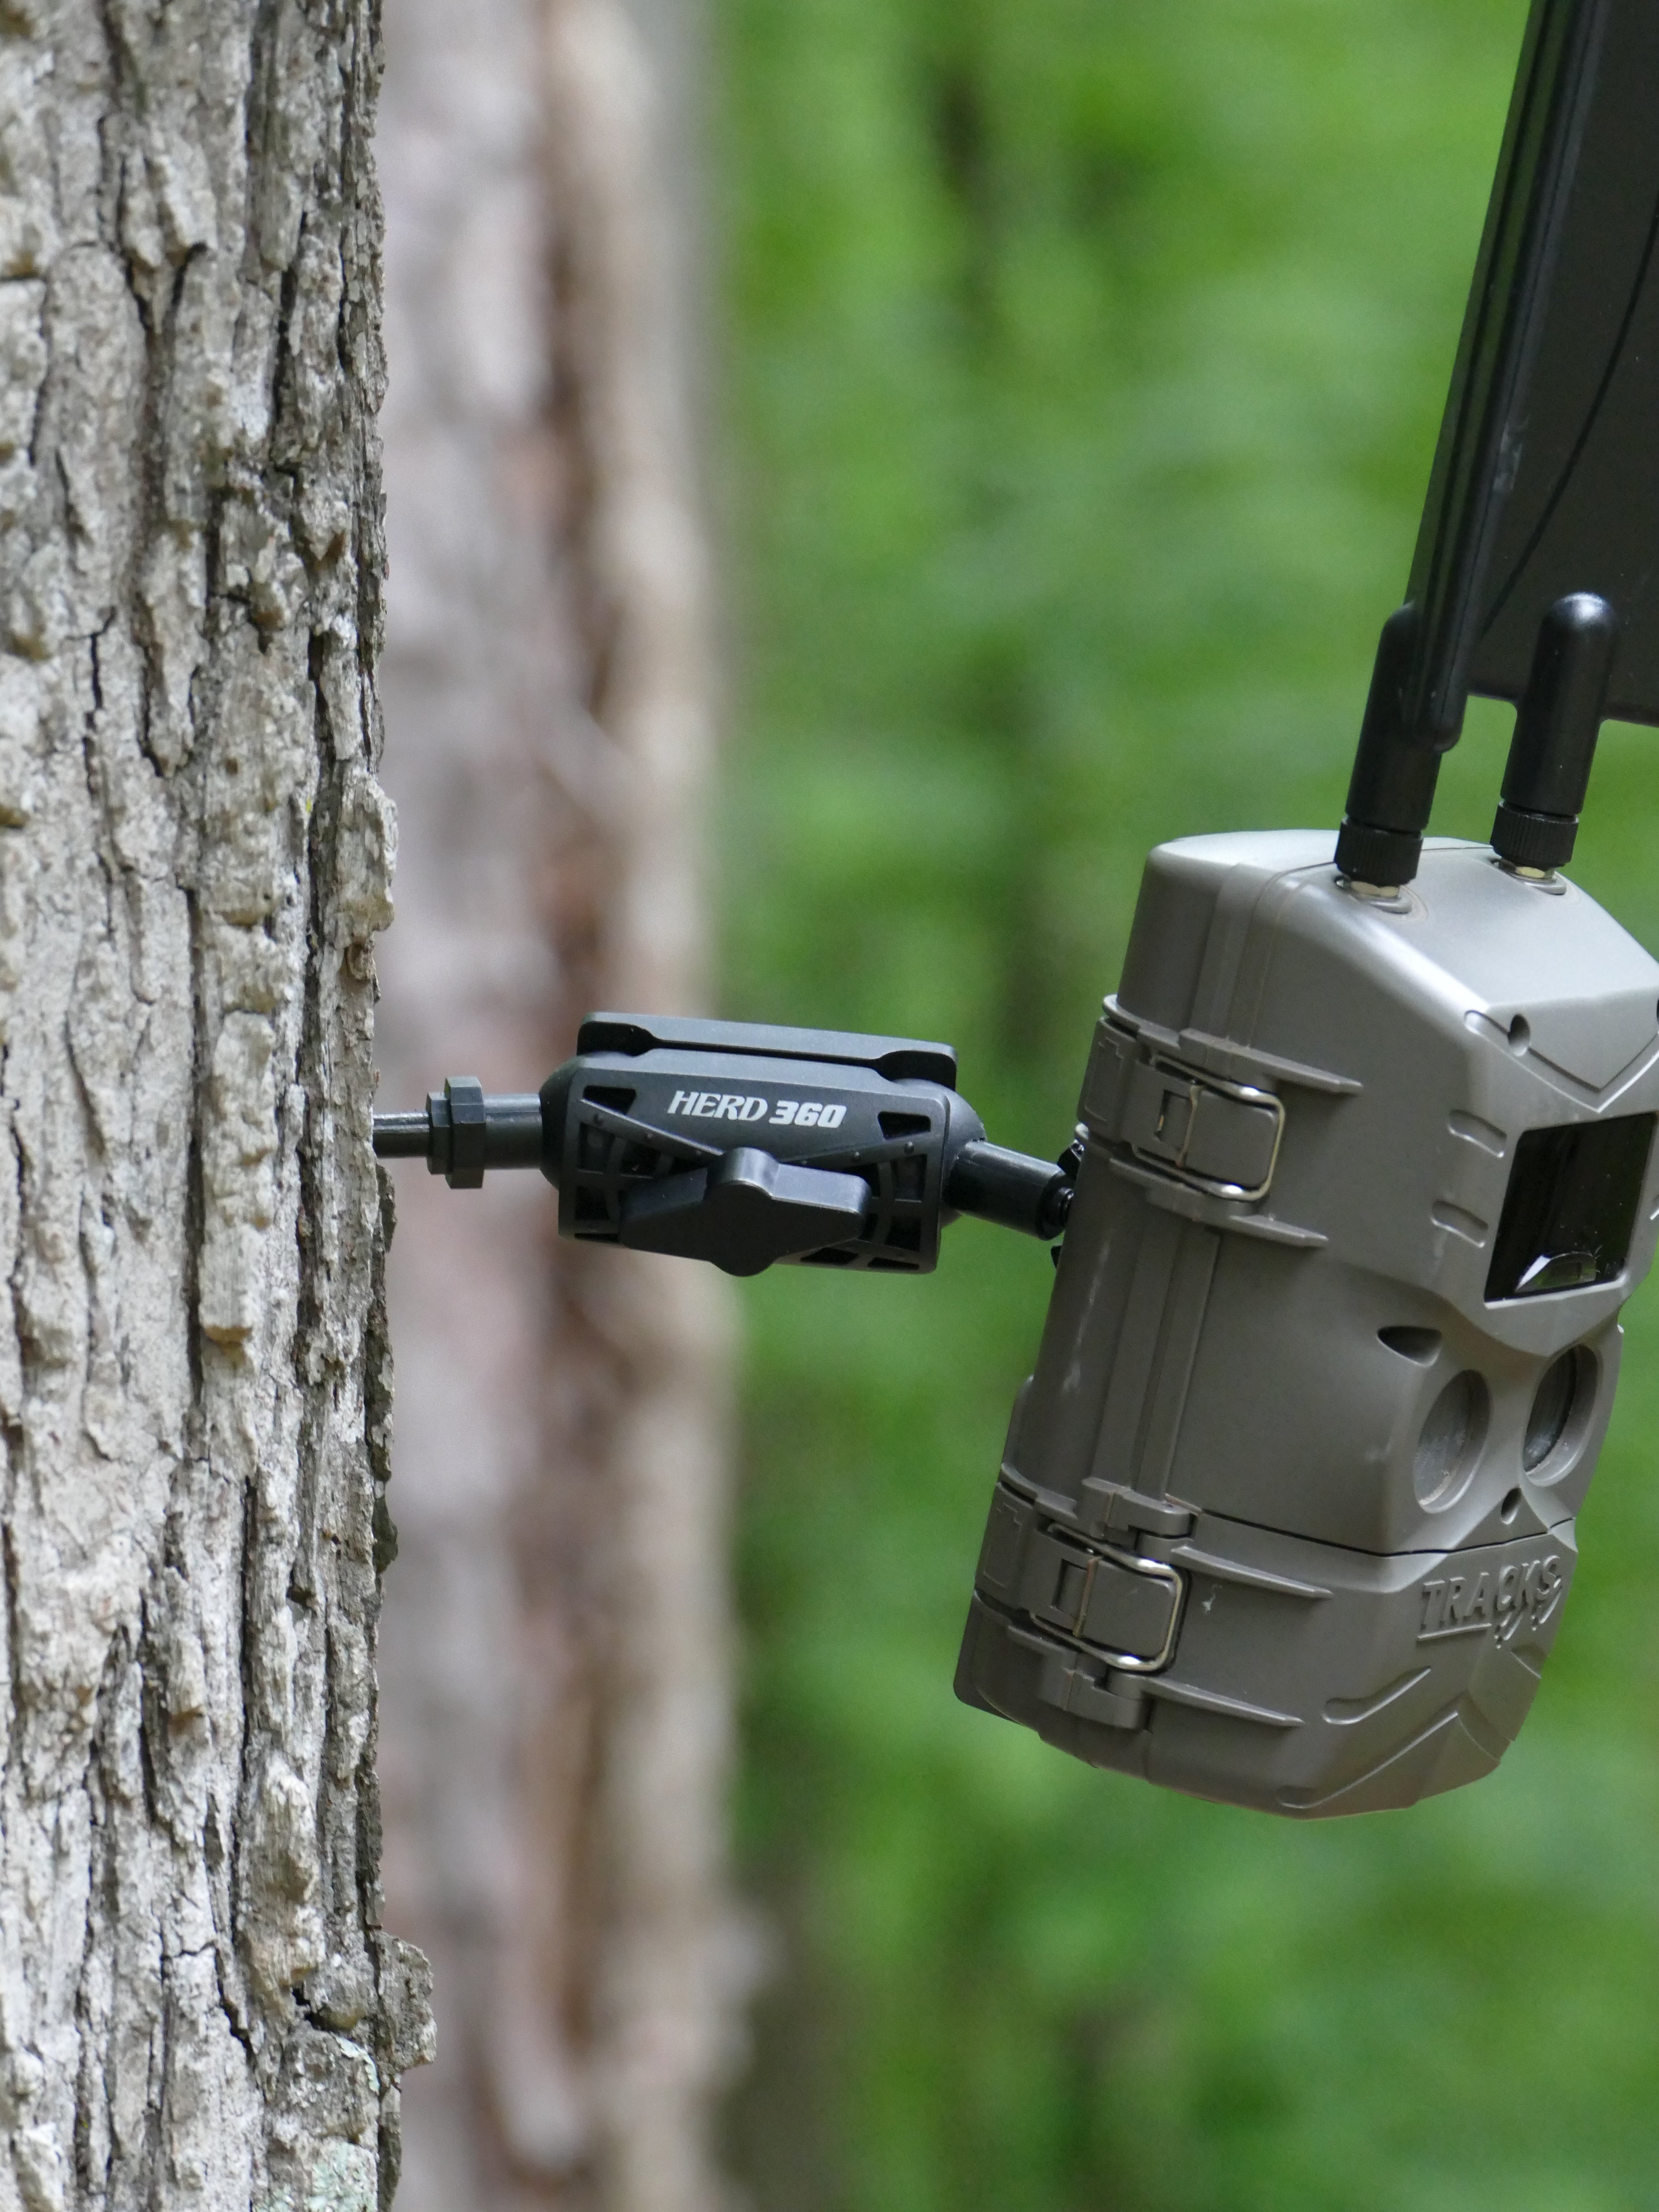 WiseEye Mini Cam Cellular Trail Camera Build your Bundle and Save